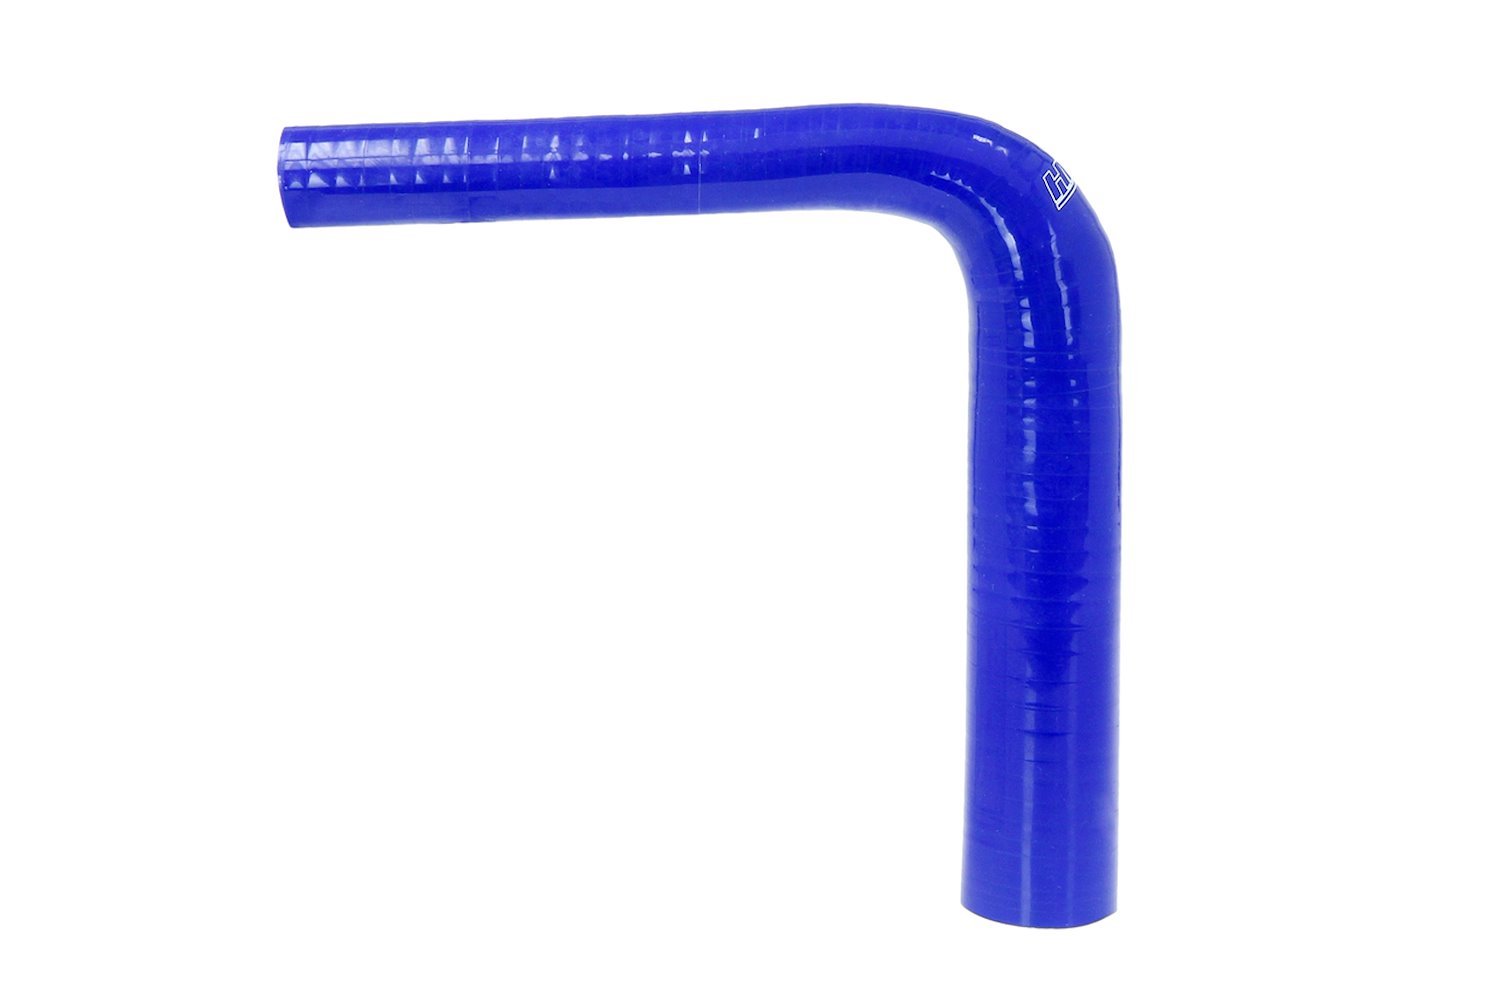 HTSER90-100-138-BLUE Silicone 90-Degree Elbow Hose, High-Temp 4-Ply Reinforced, 1 in. - 1-3/8 in. ID, Blue